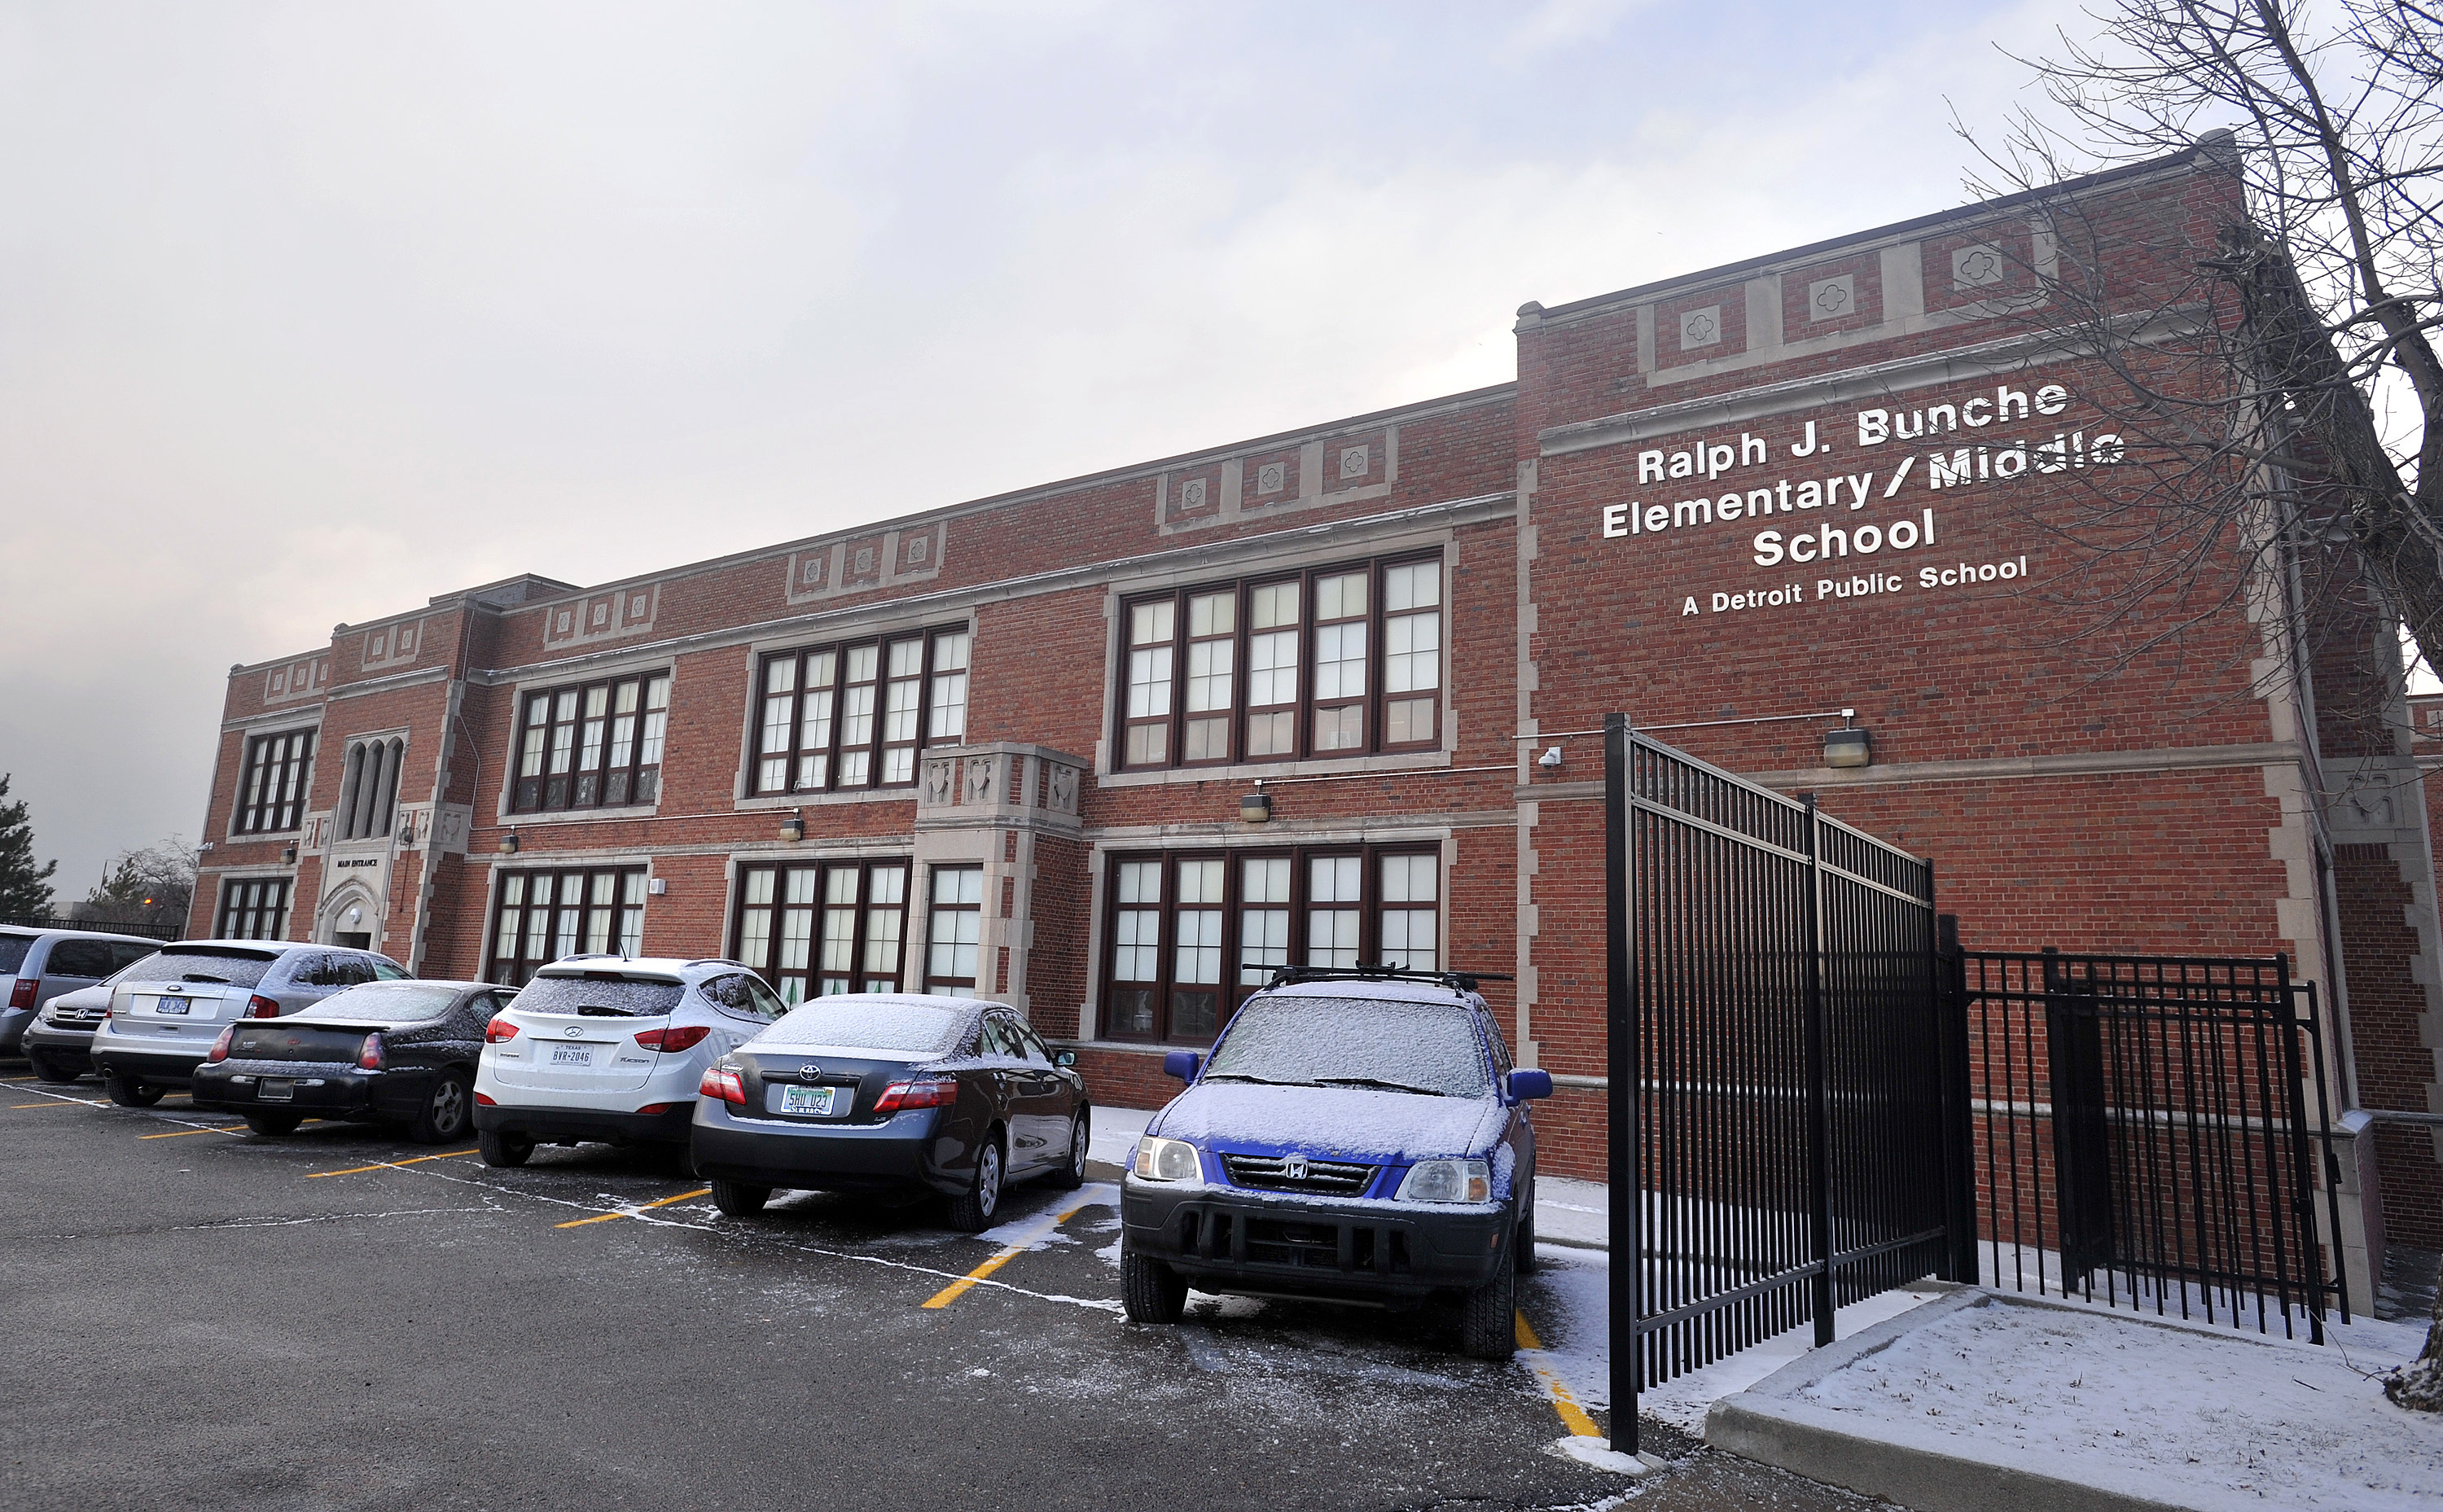 The Ralph J. Bunche Elementary-Middle School stands in Detroit, Michigan, U.S., on Wednesday, Dec. 11, 2013. (Bloomberg&mdash;Bloomberg via Getty Images)